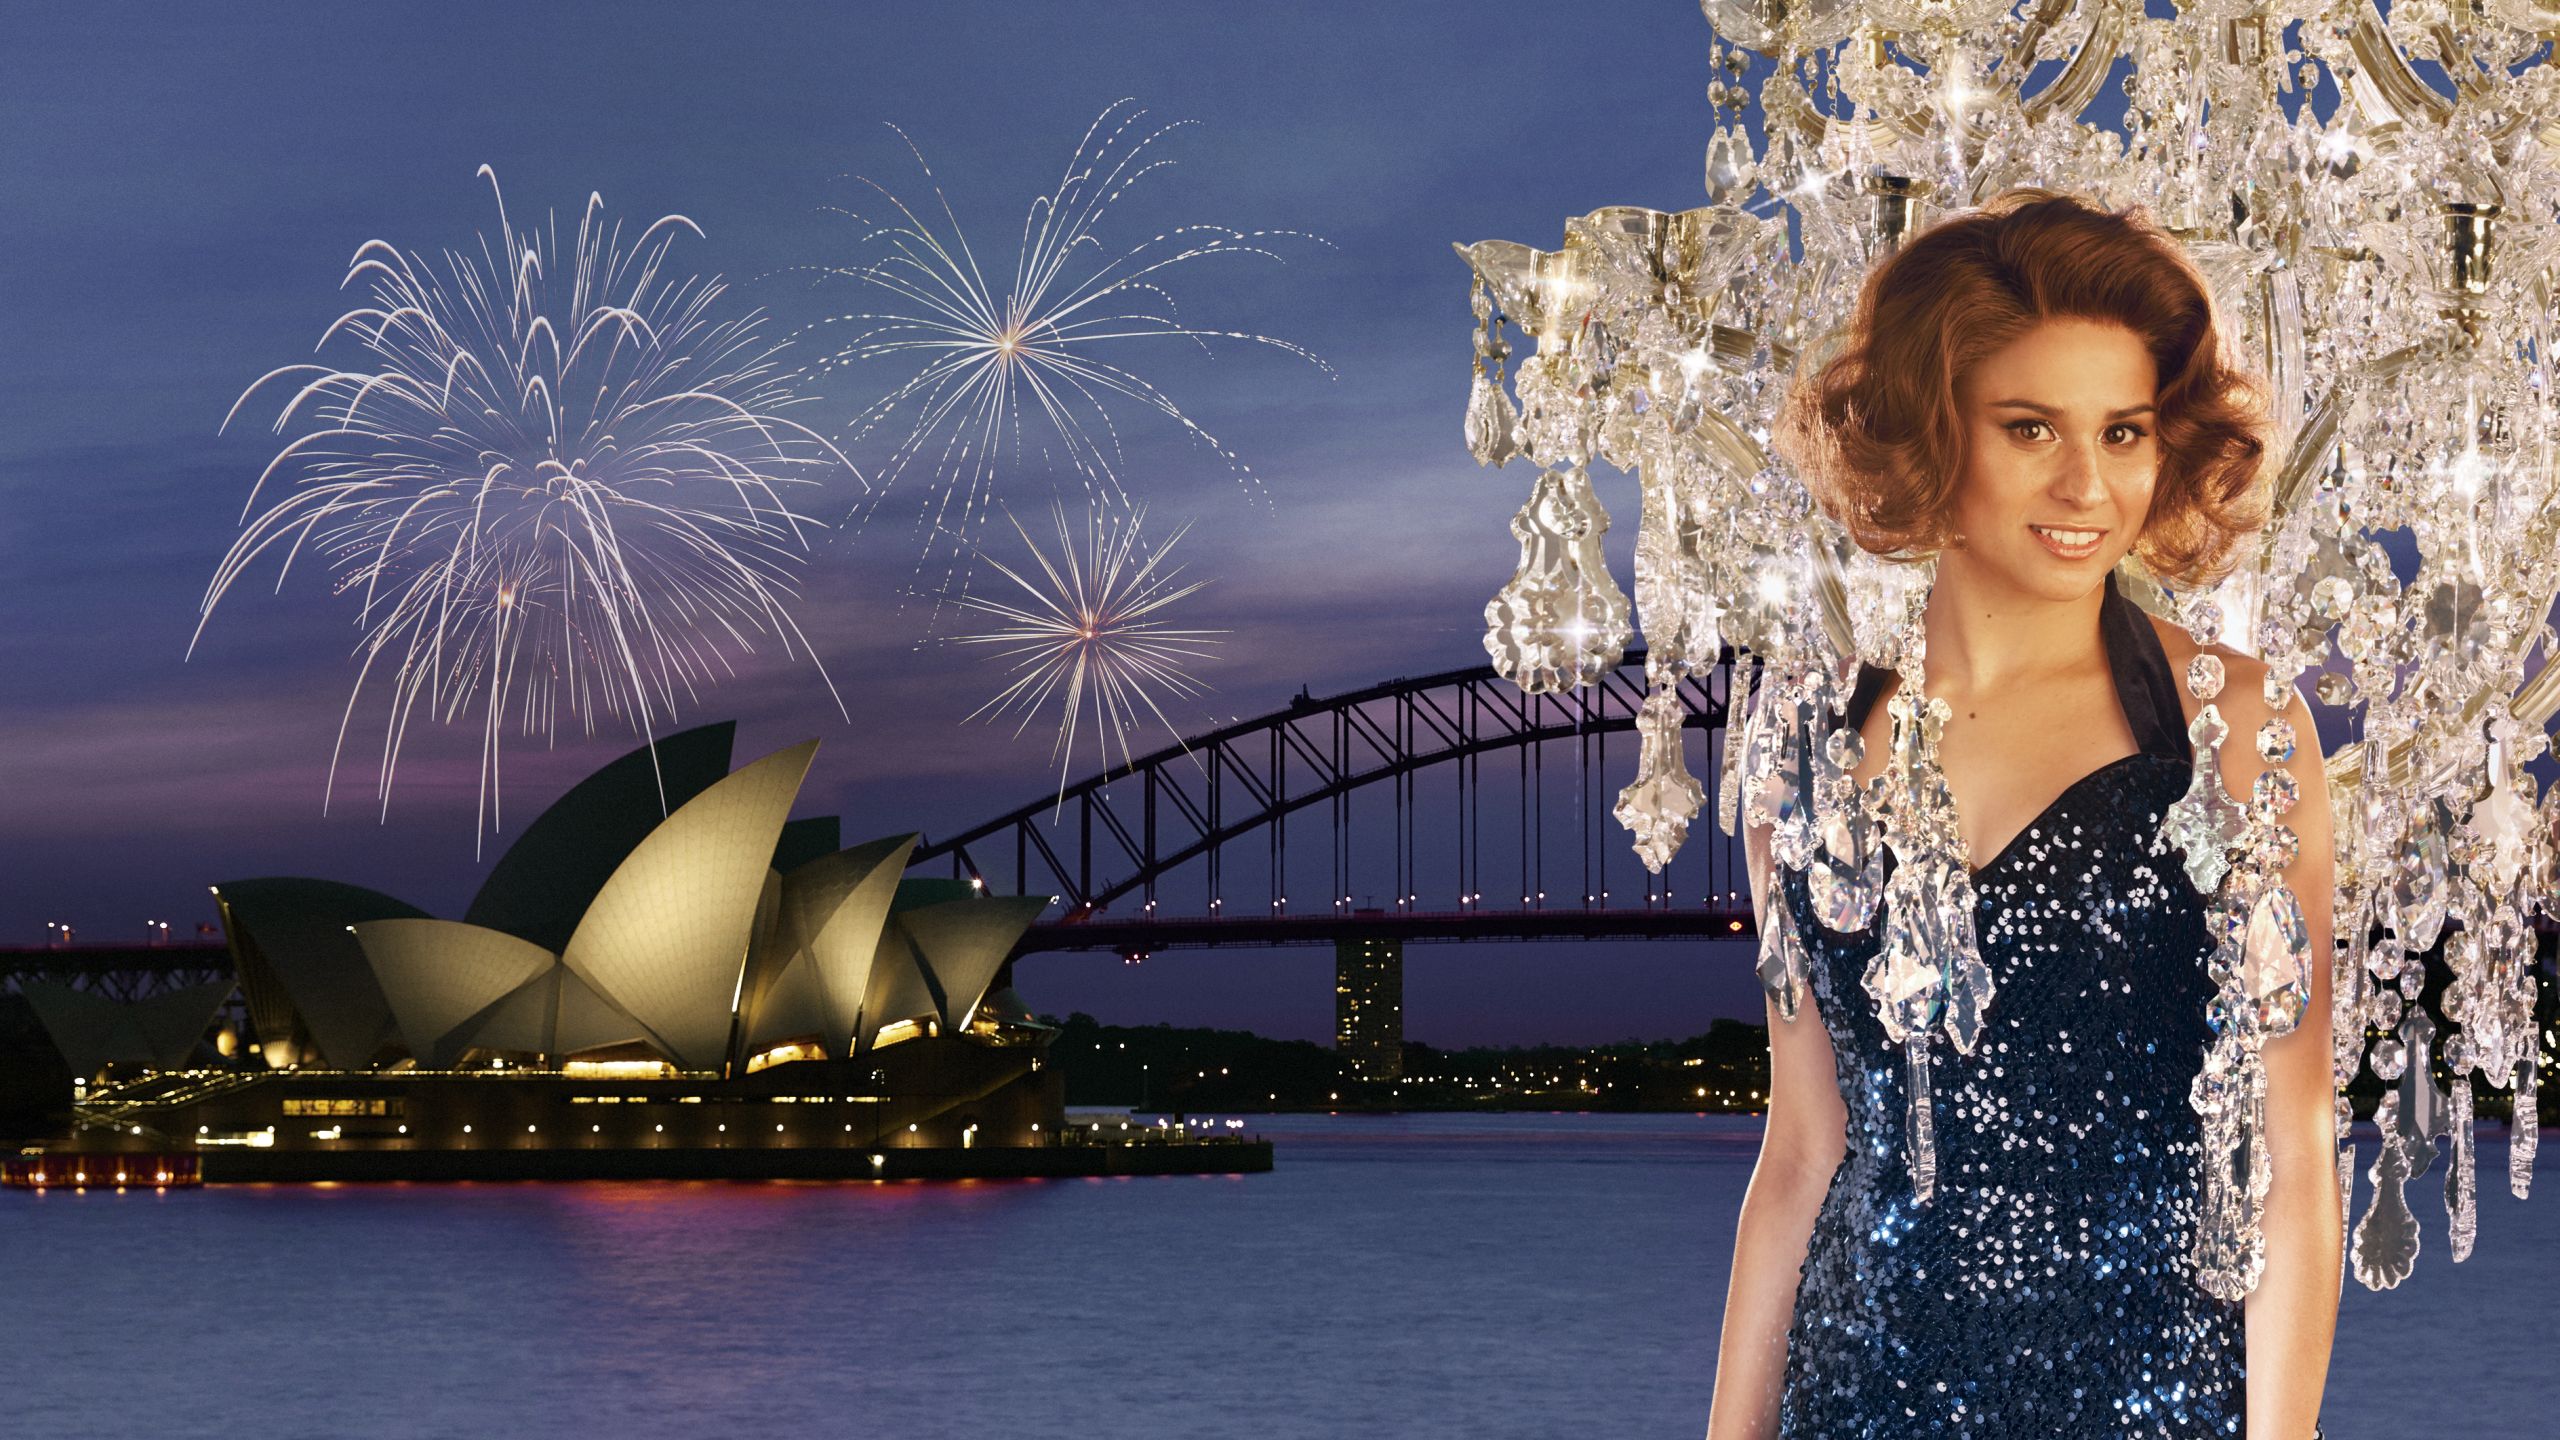 Stacey Alleaume as Violetta in La Traviata on Sydney Harbour